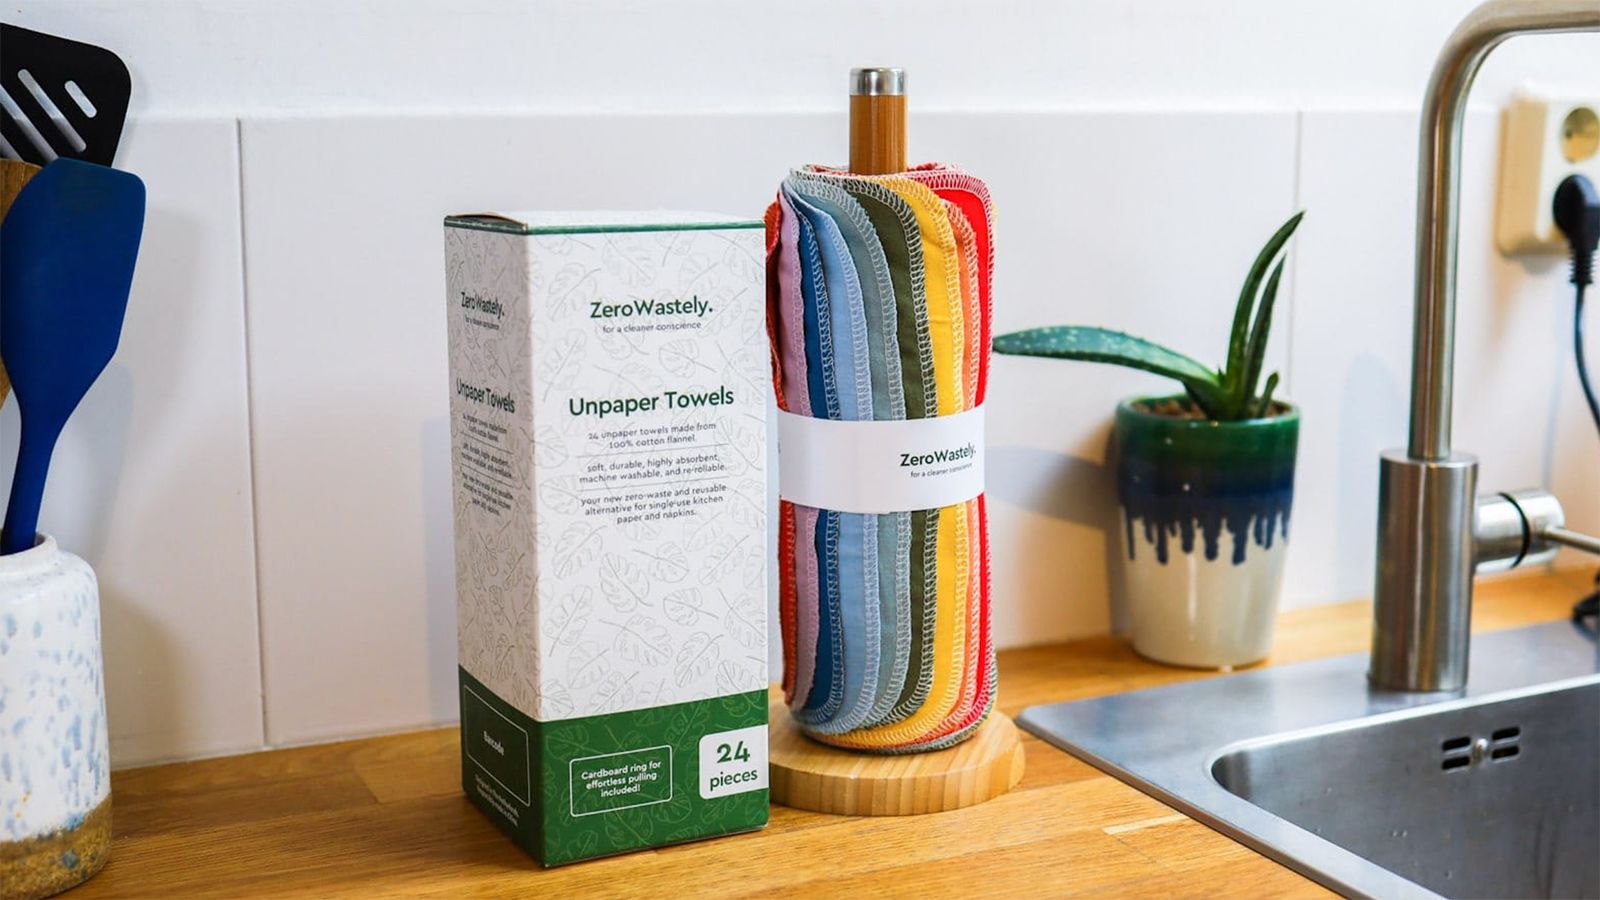 14 sustainable household products that'll save you money over time